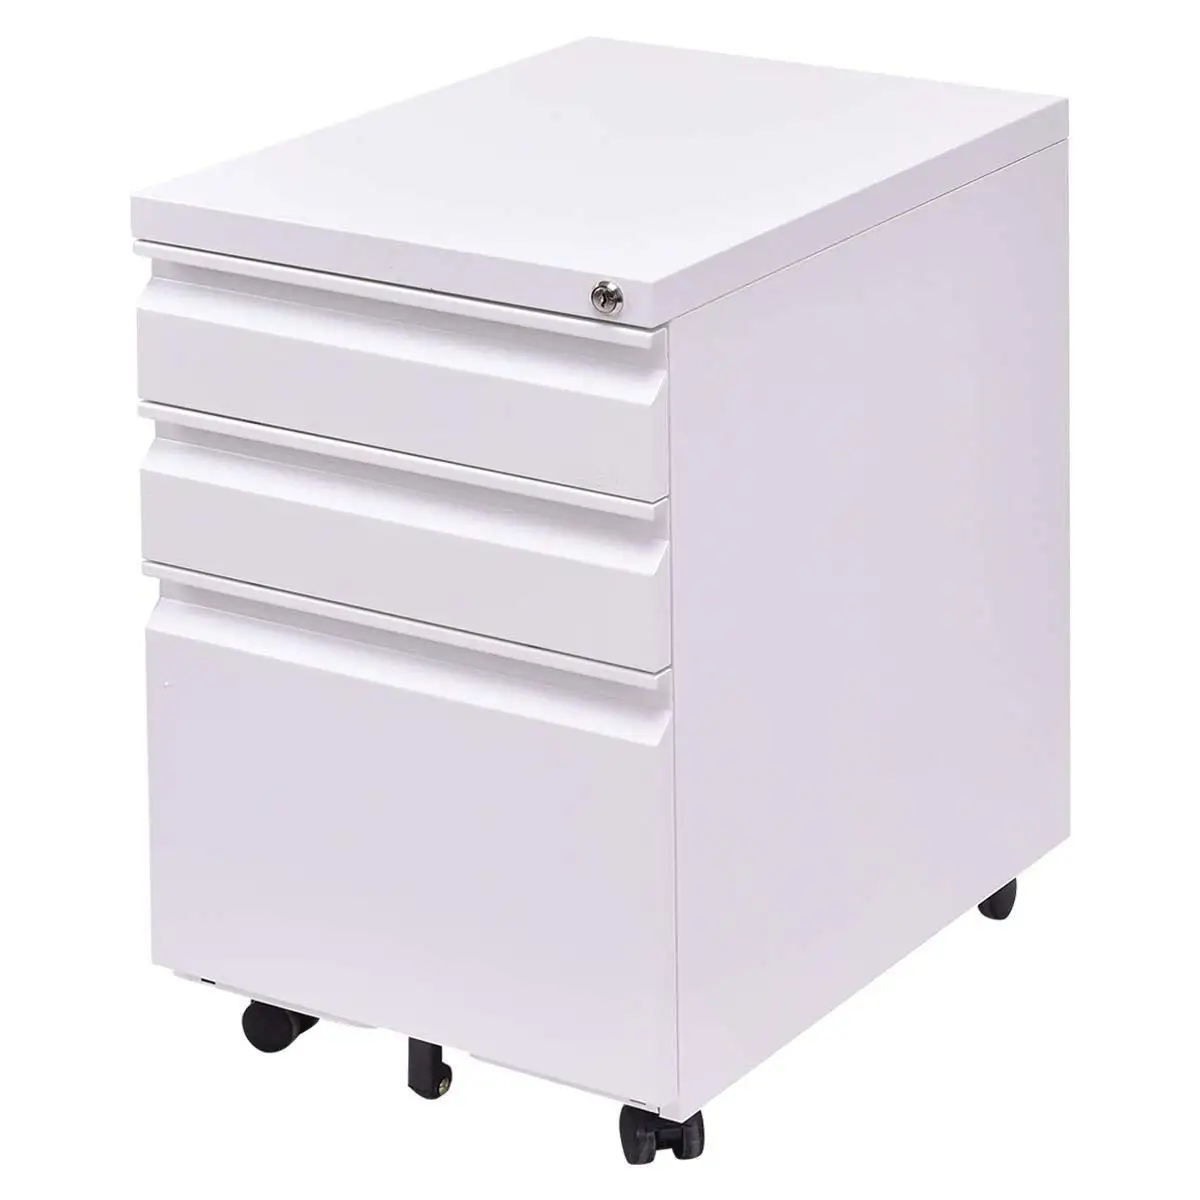 File Cabinet Caddy : Bdi Sequel 6007 2 File Caddy Atmosphere247 ...